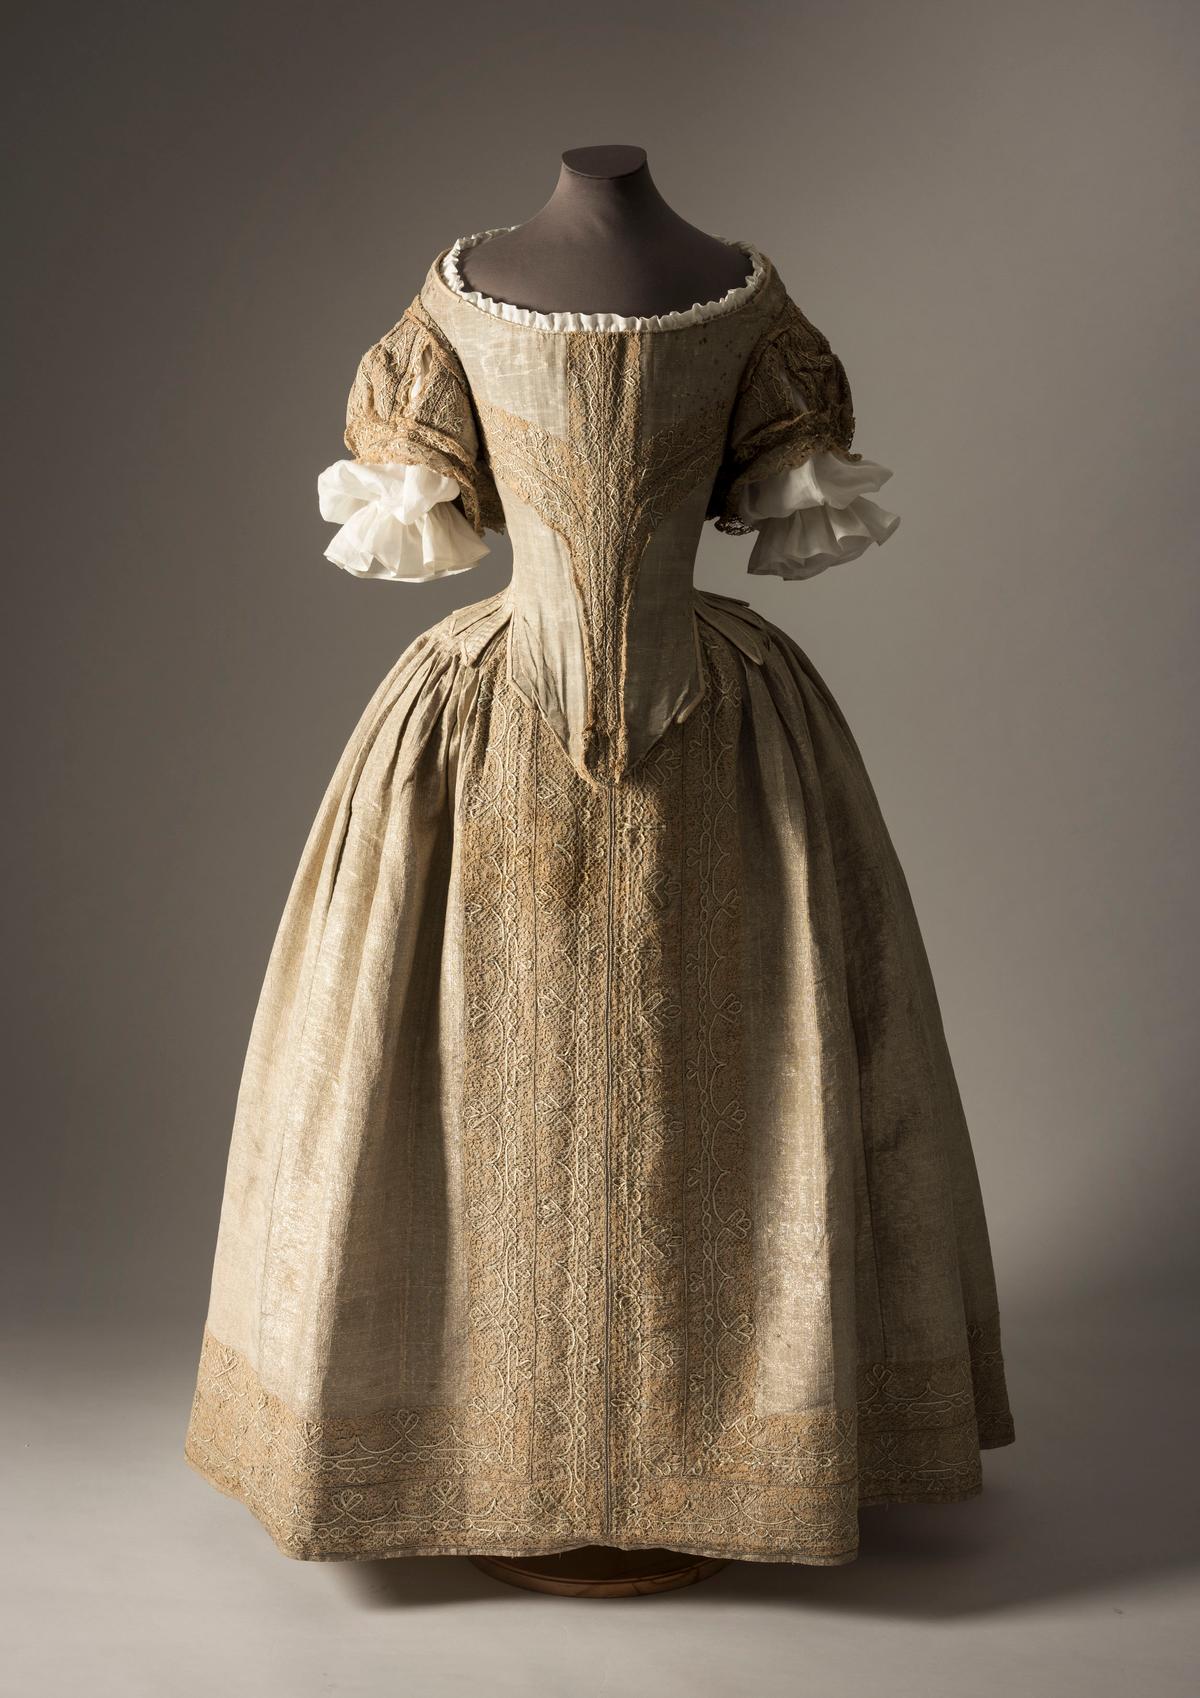 The Silver Tissue Dress, an English court dress from the 1660s, is on display at the Crown to Couture fashion exhibition at London's Kensington Palace from Apr. 5 to Oct. 29, 2023. (Courtesy of Fashion Museum Bath)